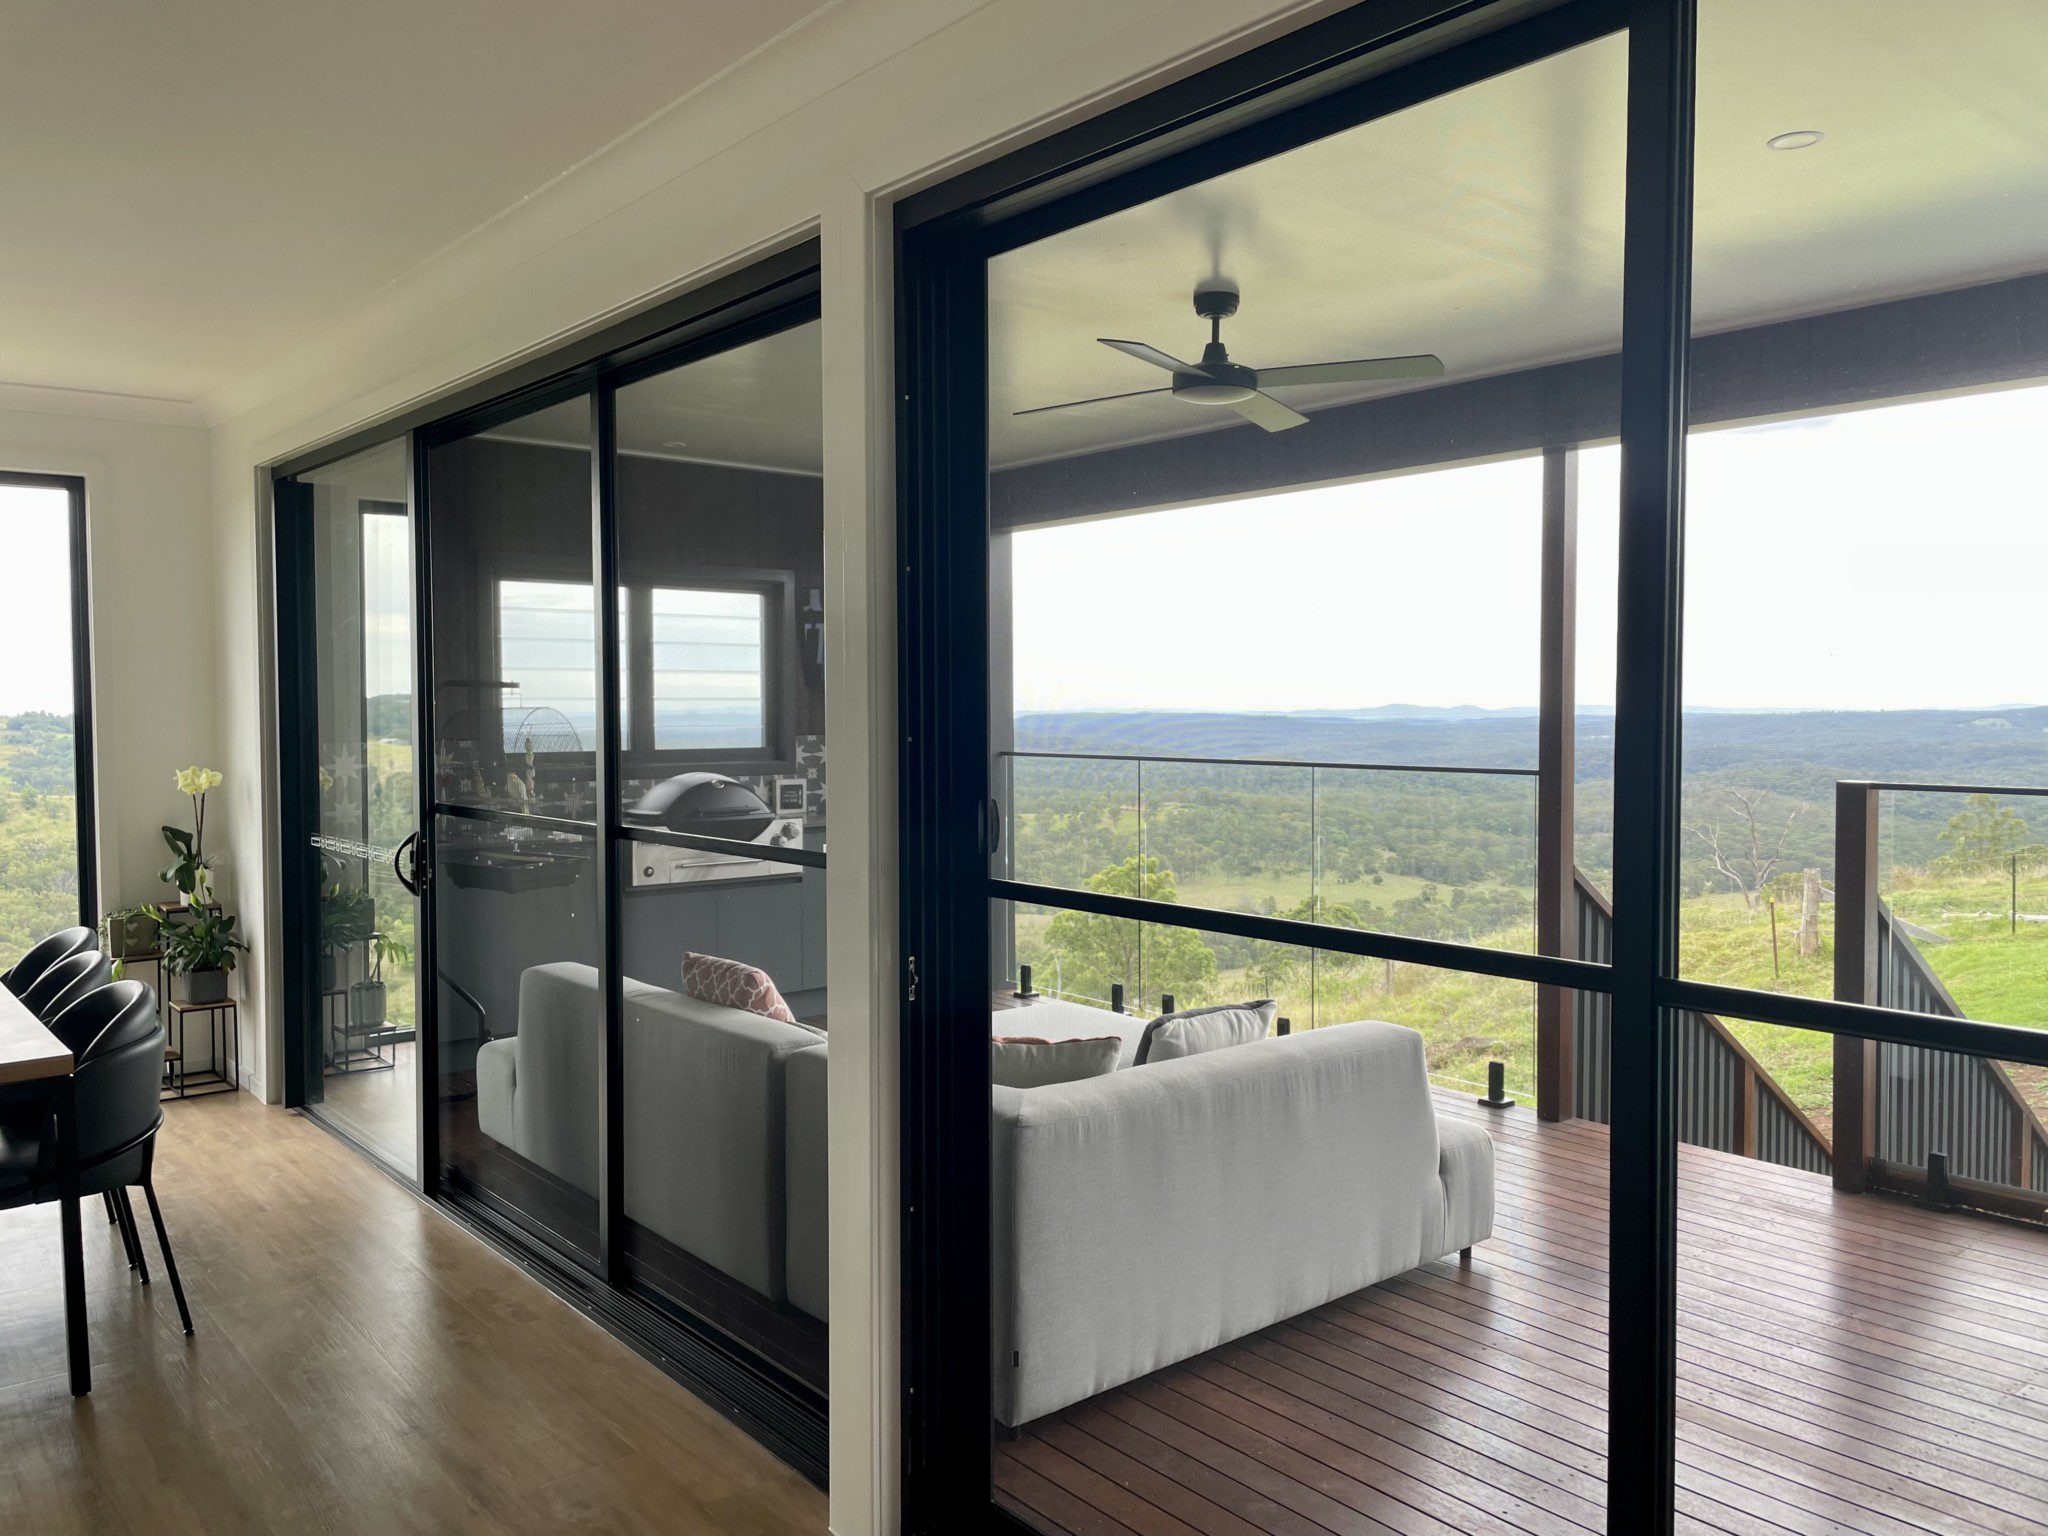 Modern, Executive House Overlooking Sweeping Views of the Great Dividing Range